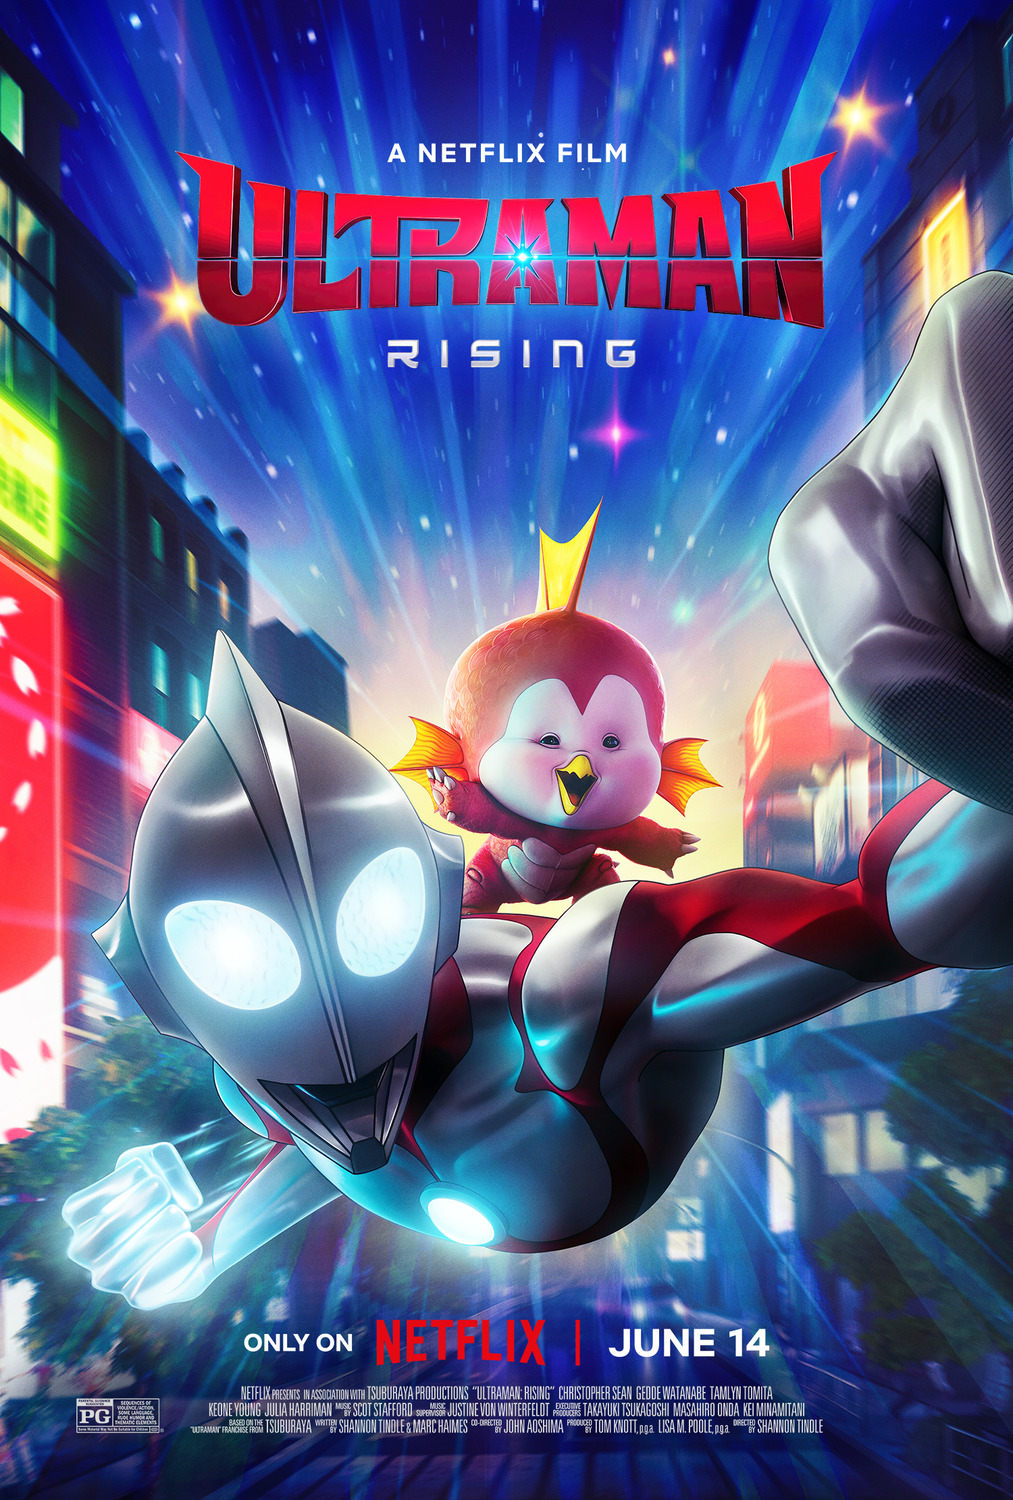 Extra Large Movie Poster Image for Ultraman: Rising 